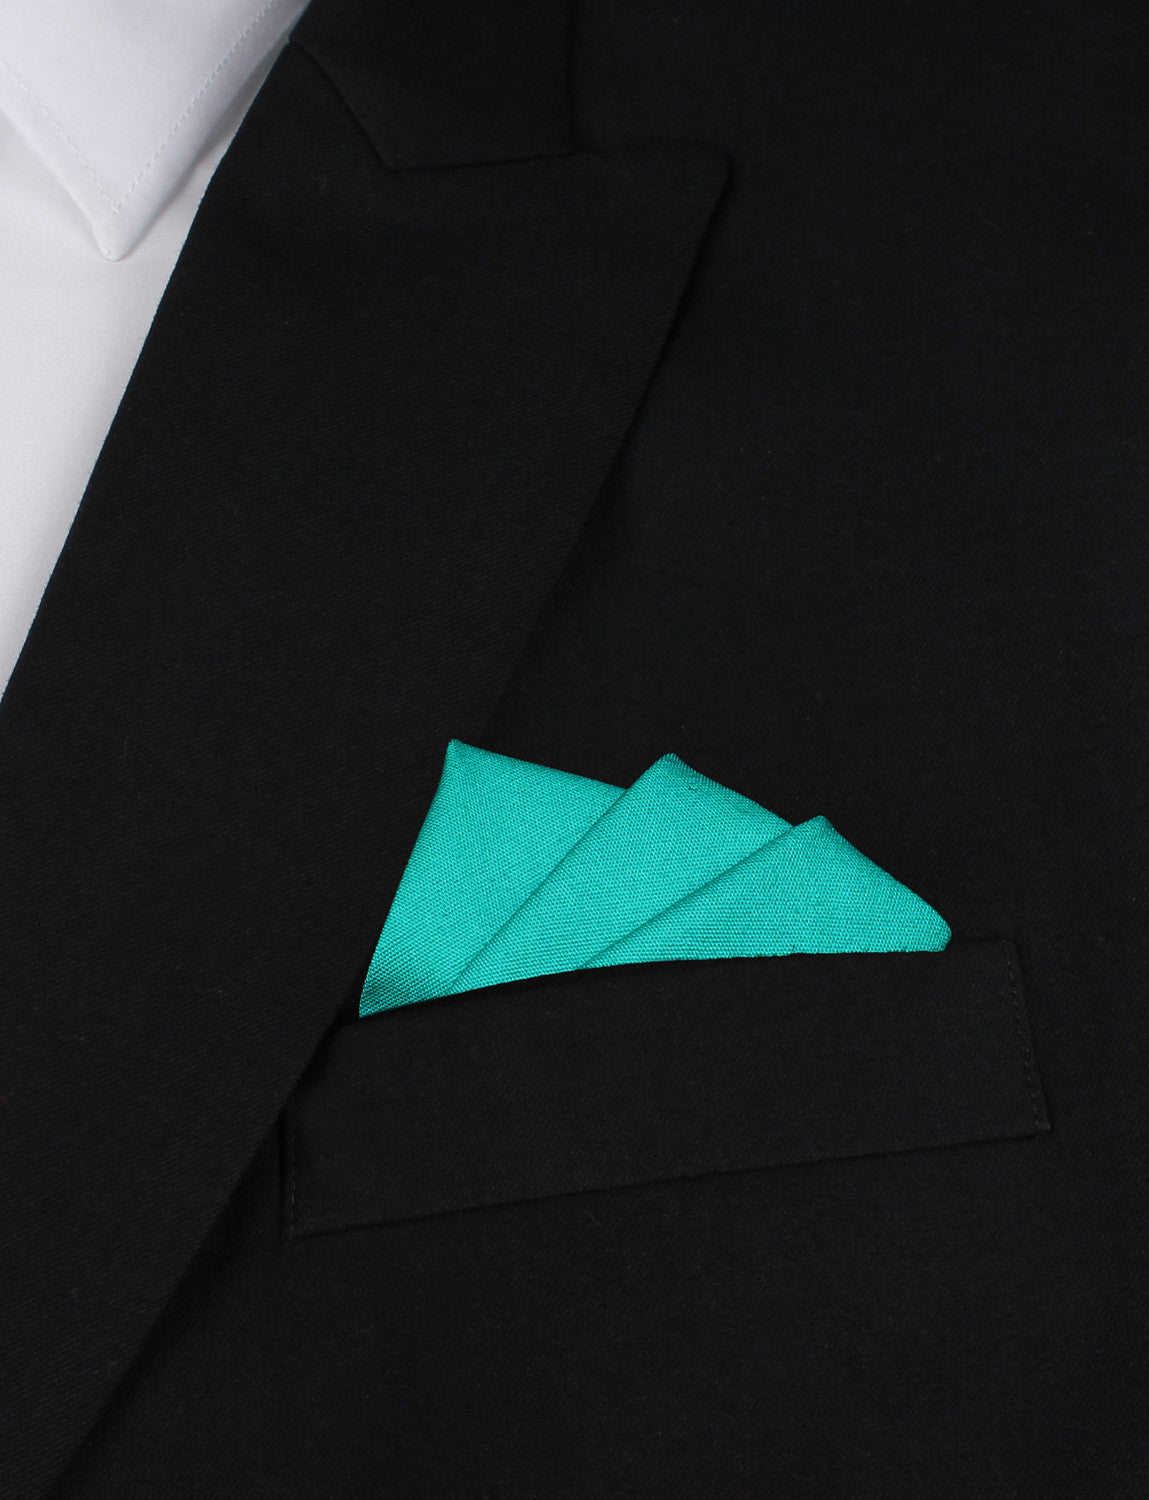 Green Teal Cotton Oxygen Three Point Pocket Square Fold